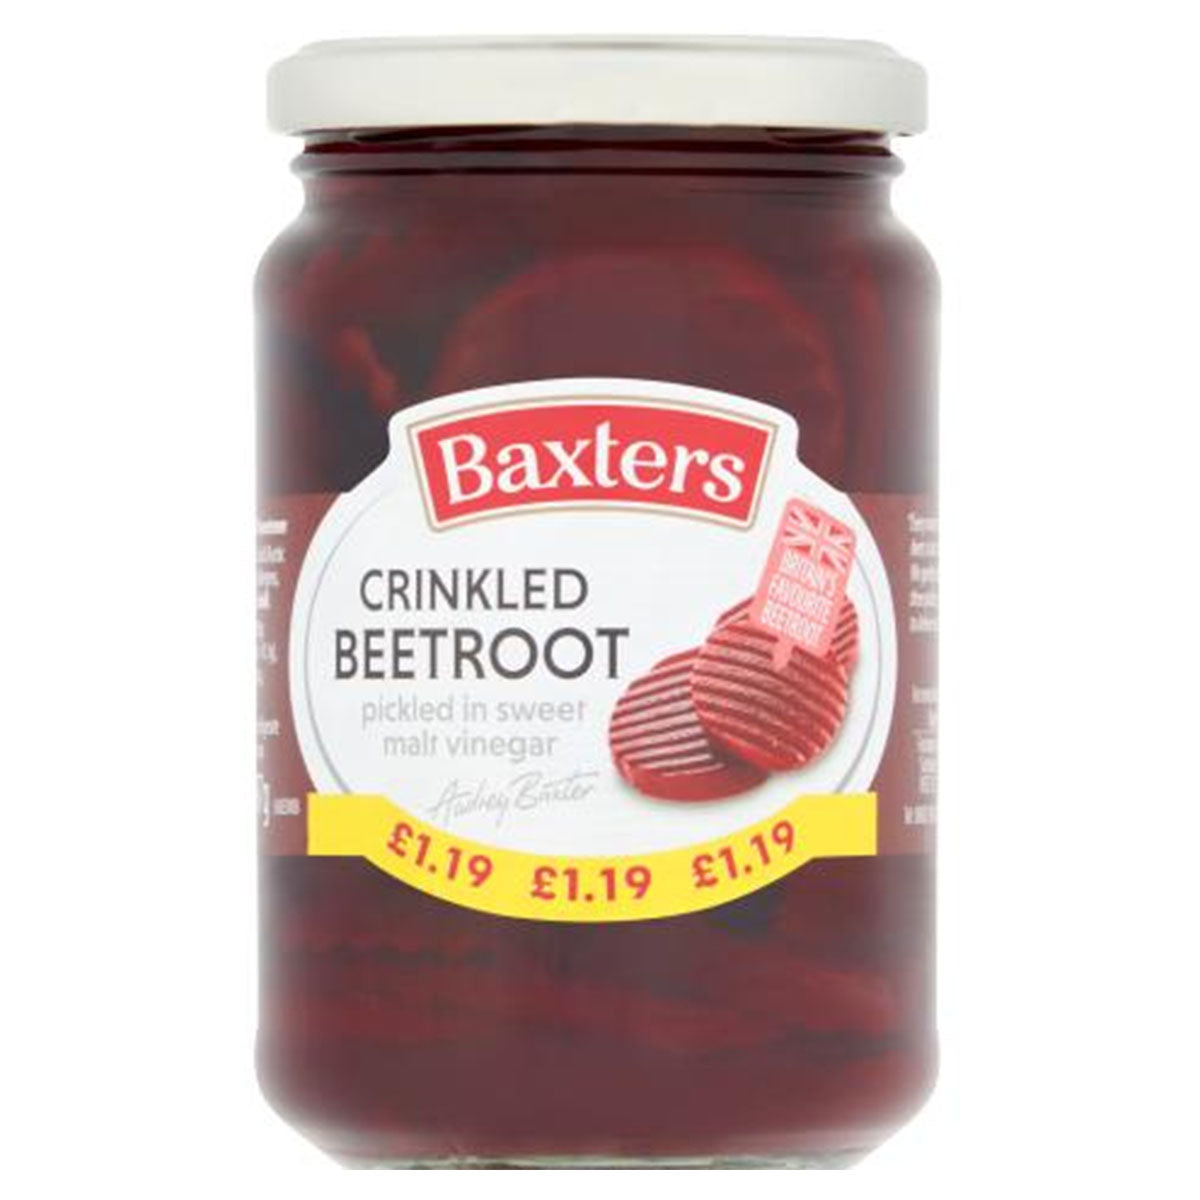 Baxters - Crinkled Beetroot - 340g - Continental Food Store